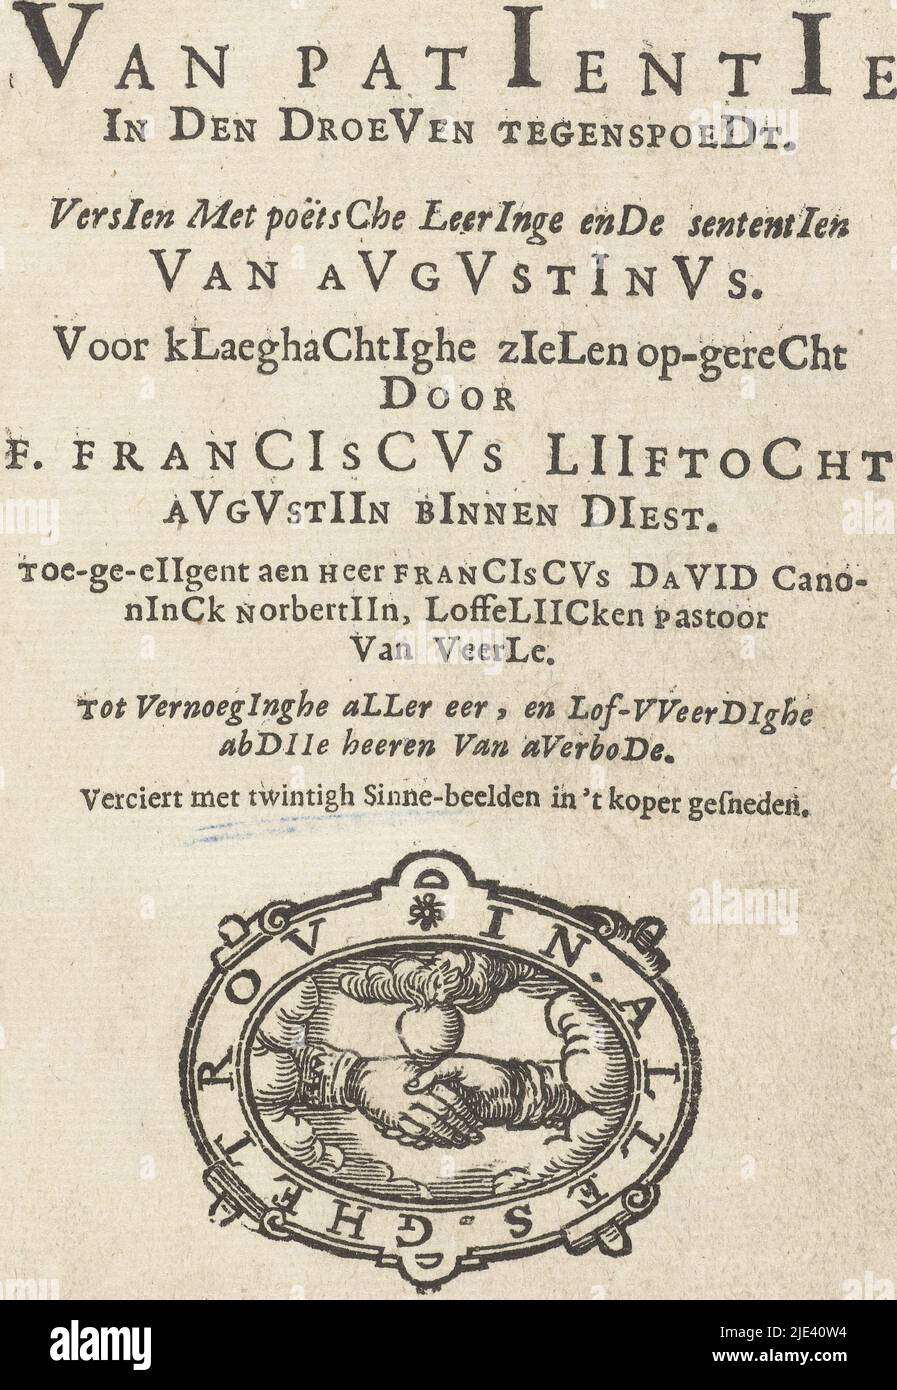 Title page for: Franciscus Lijftocht, Voor-winckel van patientie in den droeven tegenspoedt (...), 1679, dl. 1, anonymous, 1679, The title page of the emblem book with printer's advice. The full title reads Voor-Winckel van patientie in den droeven tegenspoedt. Versien met poëtsche Leeringe ende sententien van Augustinus. For sorrowful souls at-law by F. Franciscus Lijftocht Augustijn binnen Diest. Attributed to Sir Franciscus David Canoninck Norbertine, Vicar of Veerle. To the credit of all, and to the praise of the abbey lords of Averbode. Decorated with twenty-twenty images of Saint Stock Photo